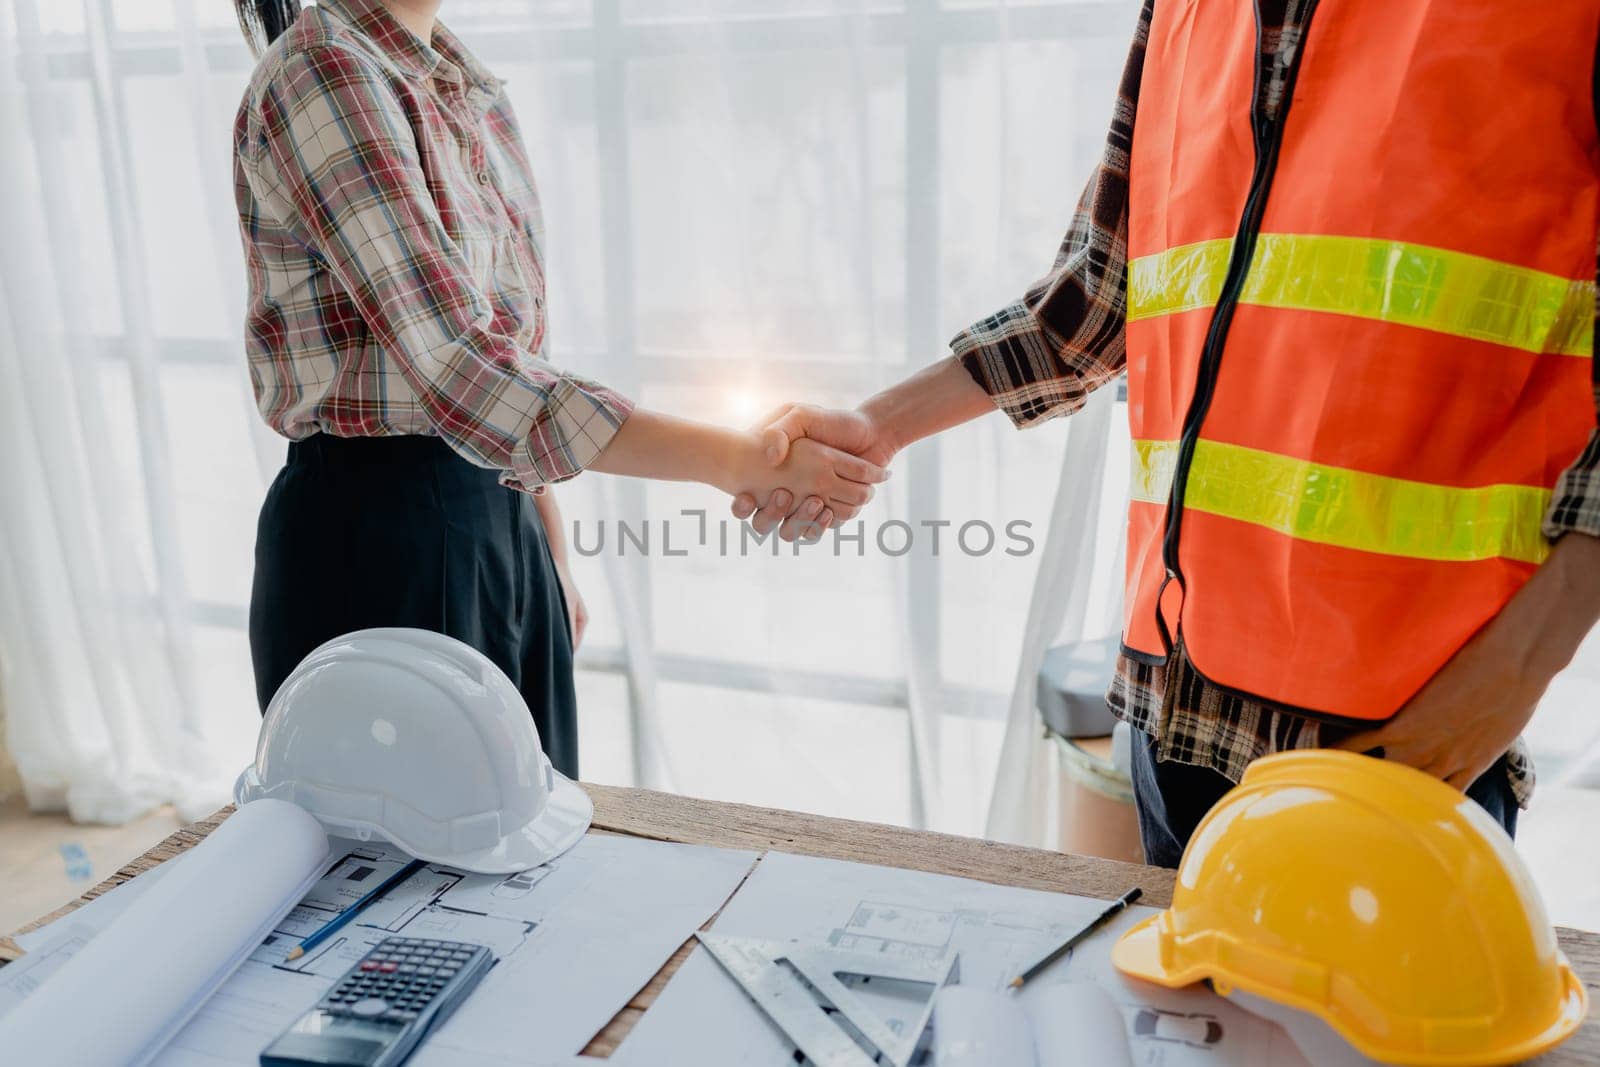 Engineers, designers and interior designers are handshake shack hands deal finalizing the design of interiors by discussing selecting materials and colors to design rooms to present to clients